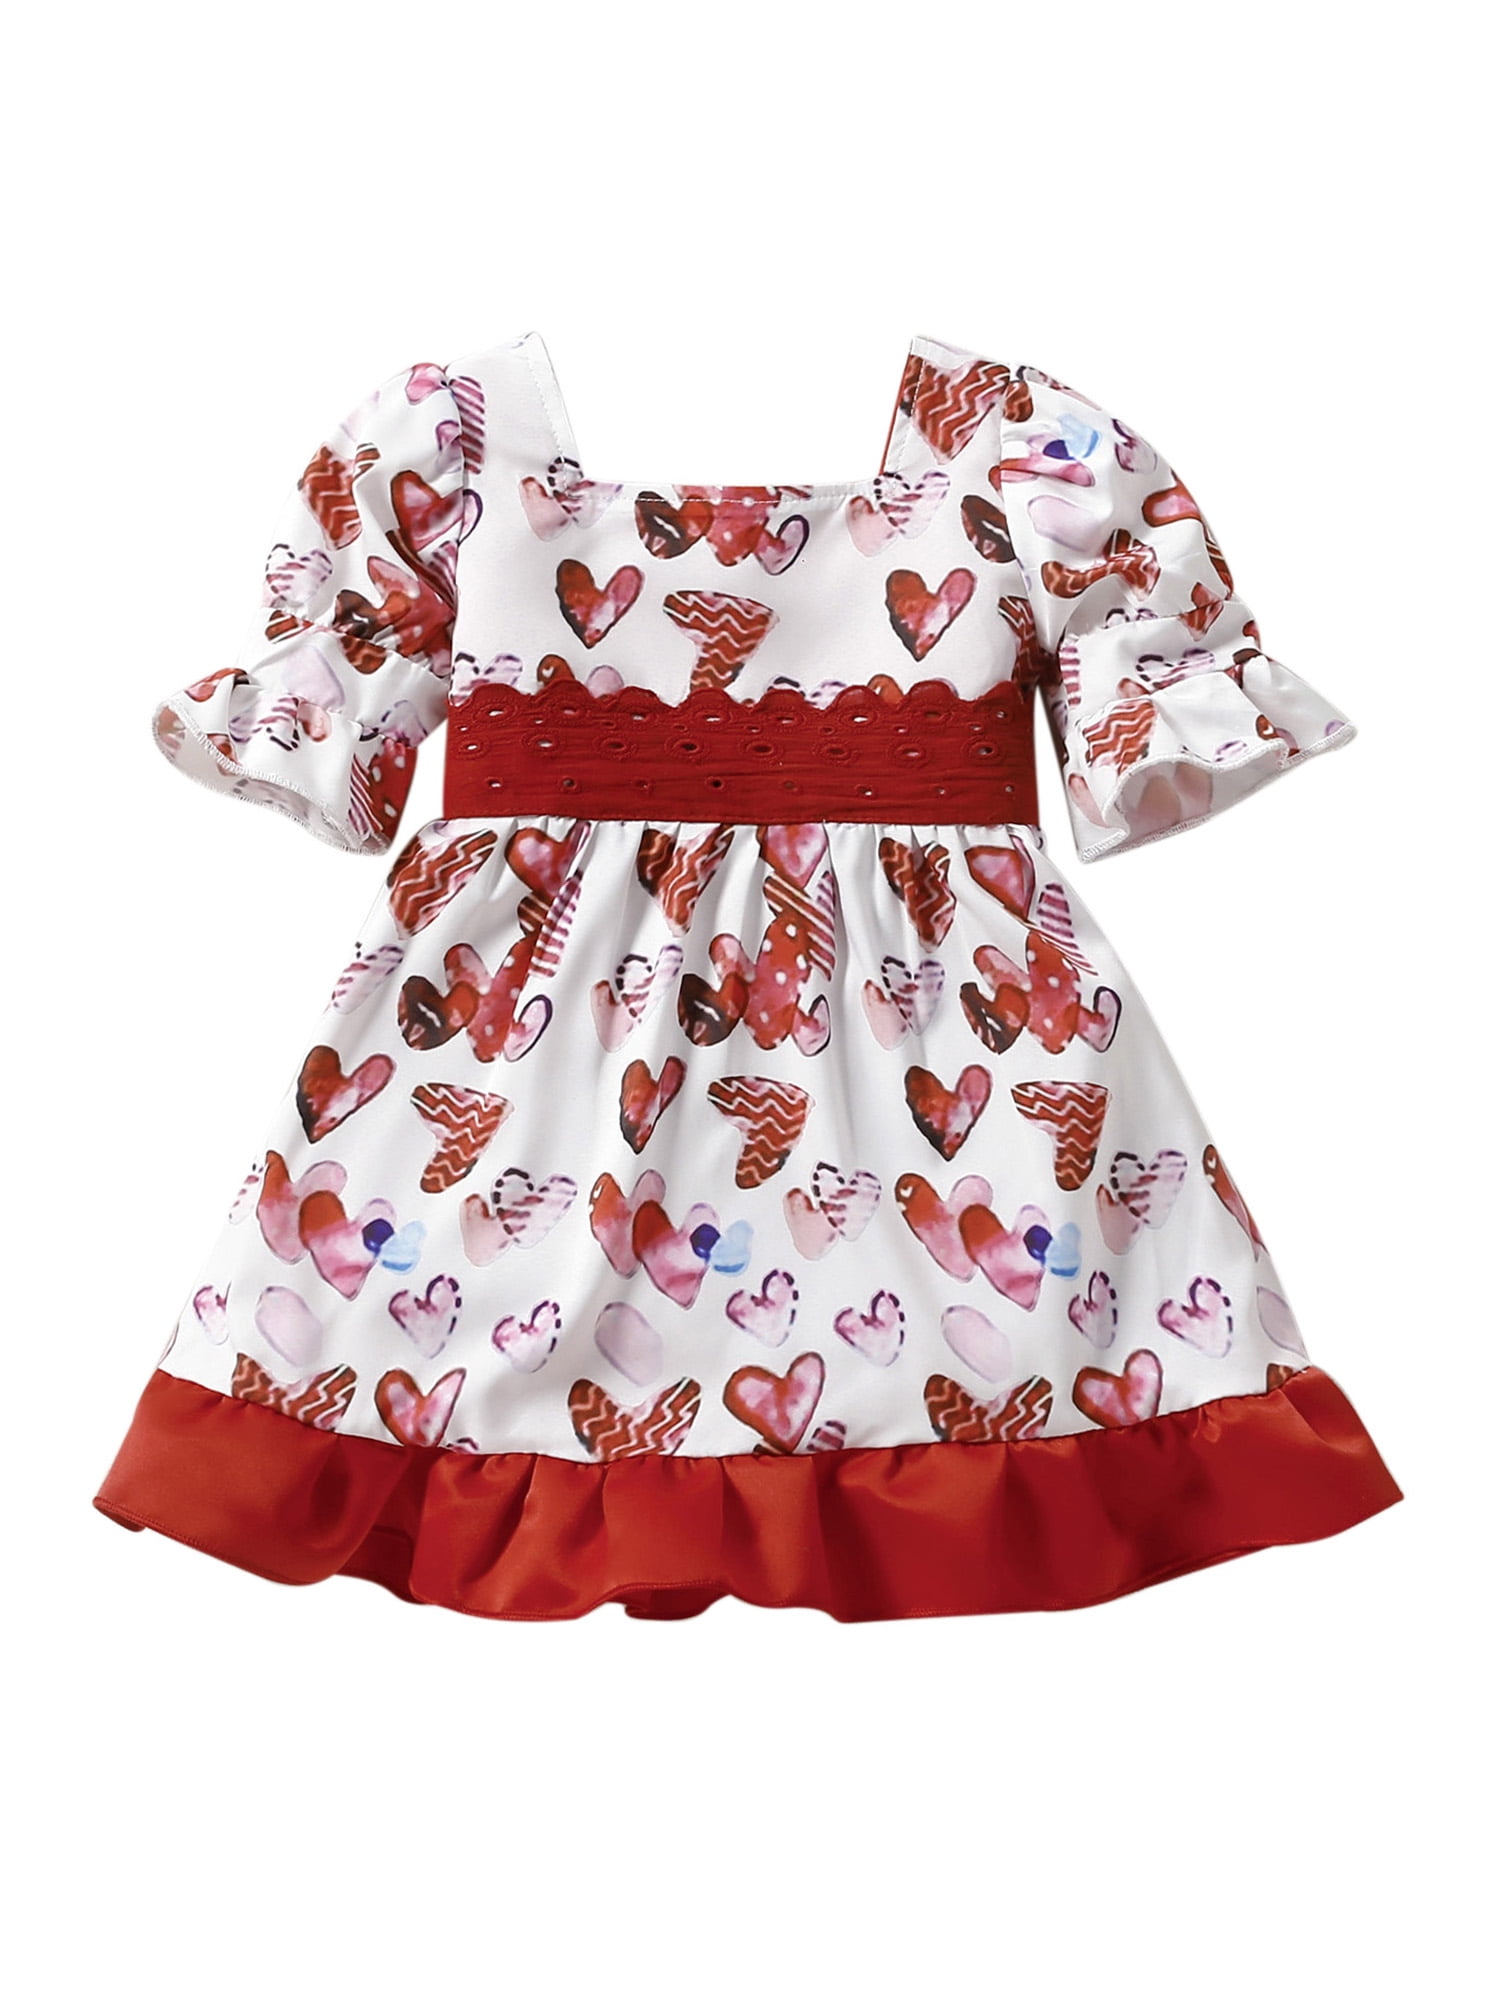 Infant Toddler Baby Girl Valentine Outfits Short Puff Sleeve Dress ...